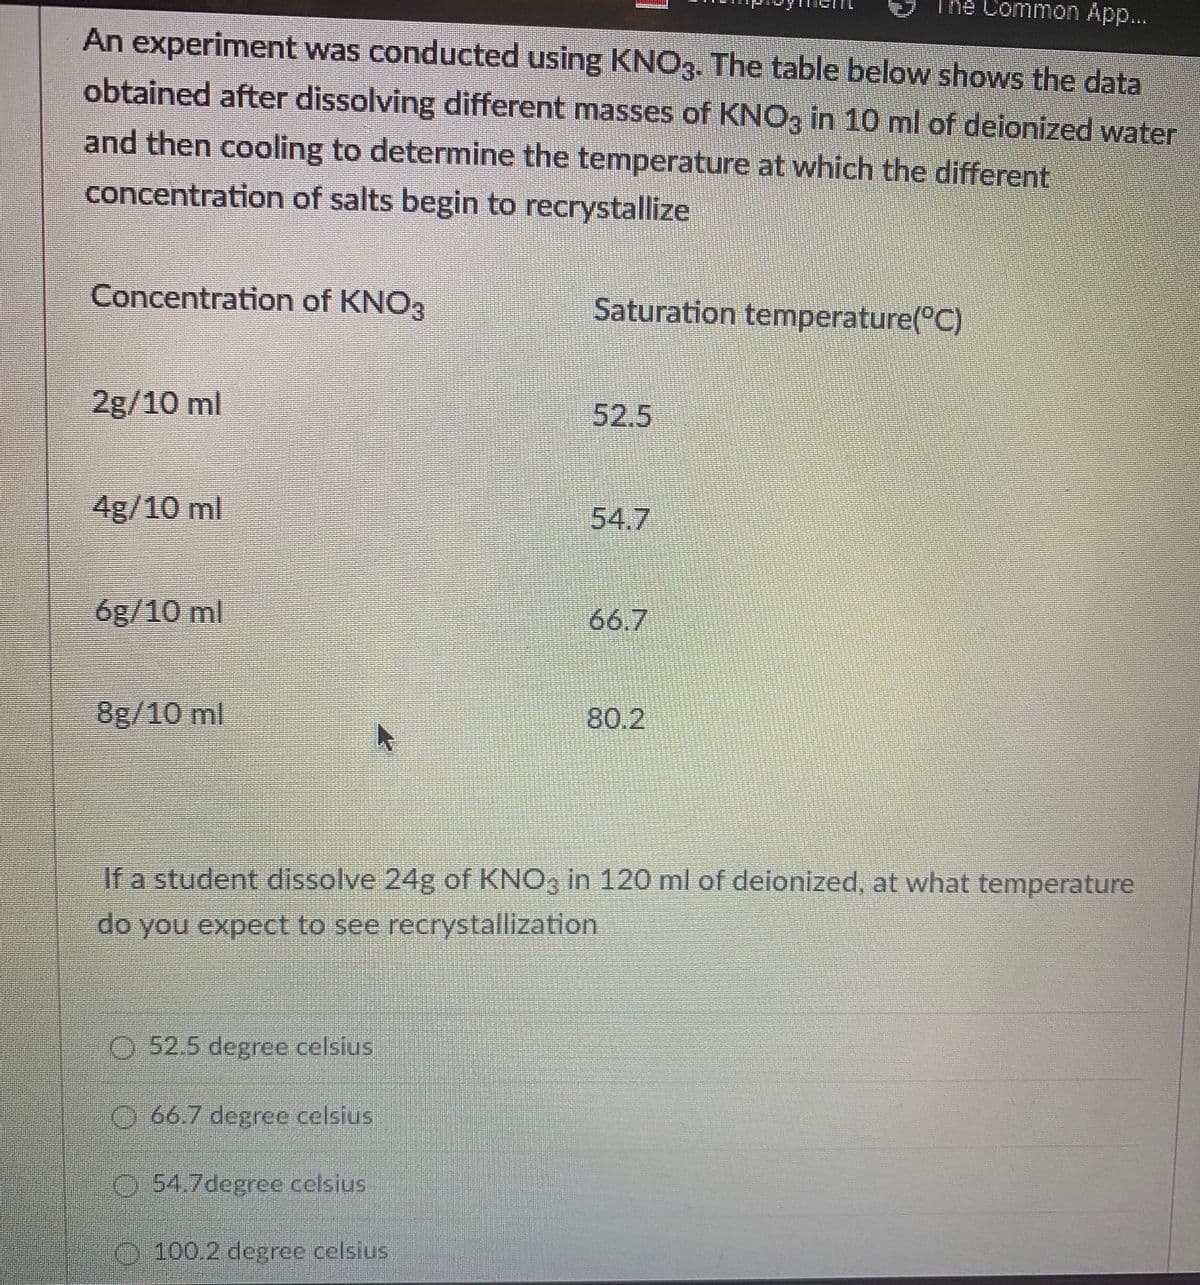 The Common App...
An experiment was conducted using KNO3. The table below shows the data
obtained after dissolving different masses of KNO3 in 10 ml of deionized water
and then cooling to determine the temperature at which the different
concentration of salts begin to recrystallize
Concentration of KNO3
Saturation temperature(°C)
2g/10 ml
52.5
4g/10 ml
54.7
6g/10 ml
66.7
8g/10 ml
80.2
If a student dissolve 24g of KNO3 in 120 ml of deionized, at what temperature
do you expect to see recrystallization
O 52.5 degree celsius
O 66.7 degree celsius
0:54.7degrce celsius
O100.2 degree celsius
